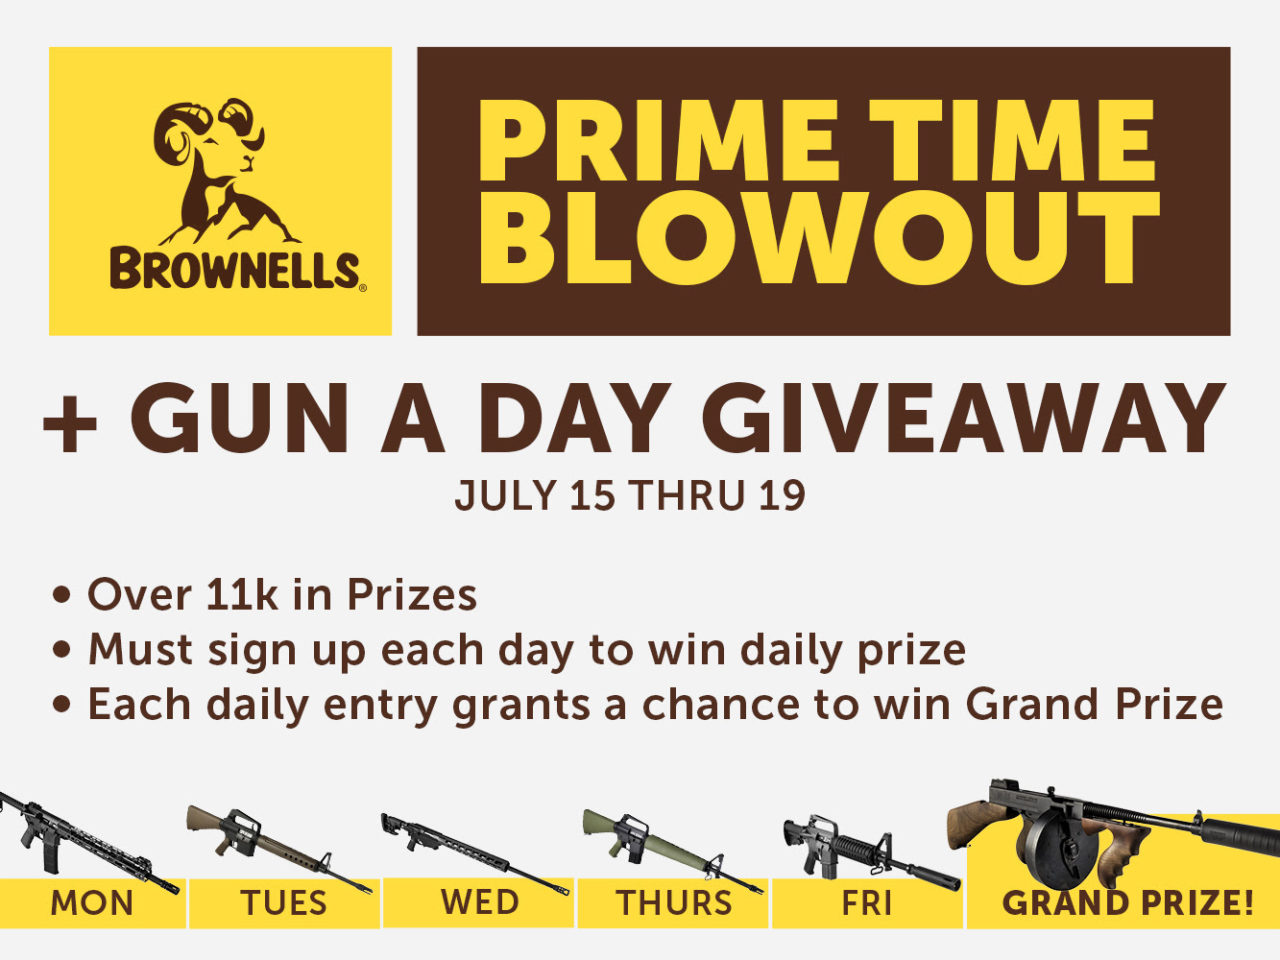 Brownells Prime Time Blowout Features Deals & Free Guns